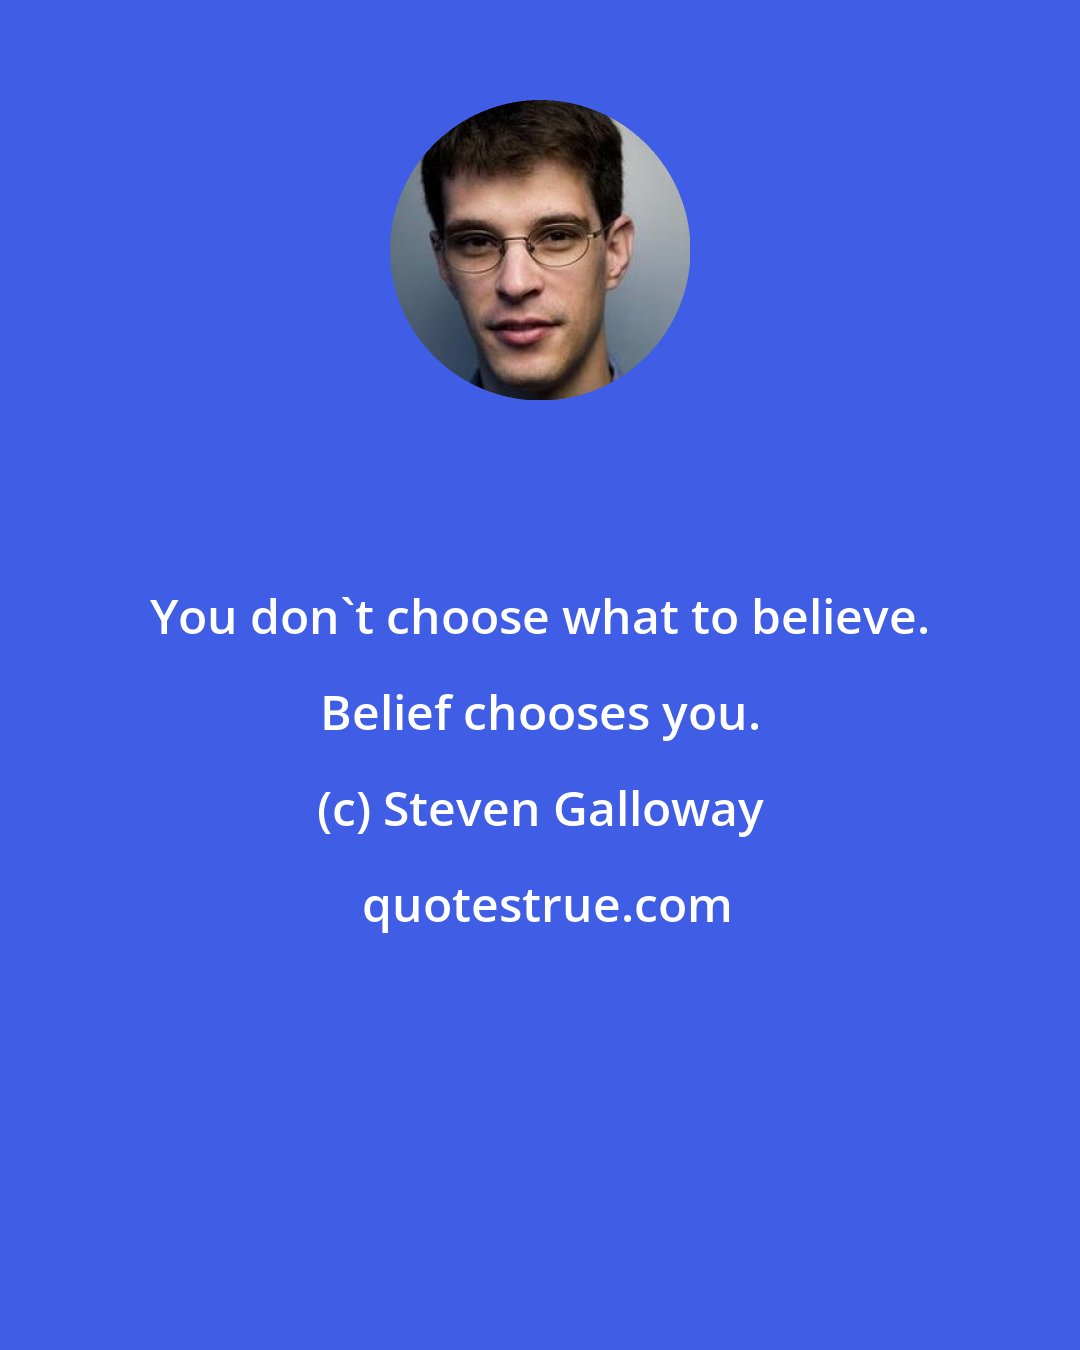 Steven Galloway: You don't choose what to believe. Belief chooses you.